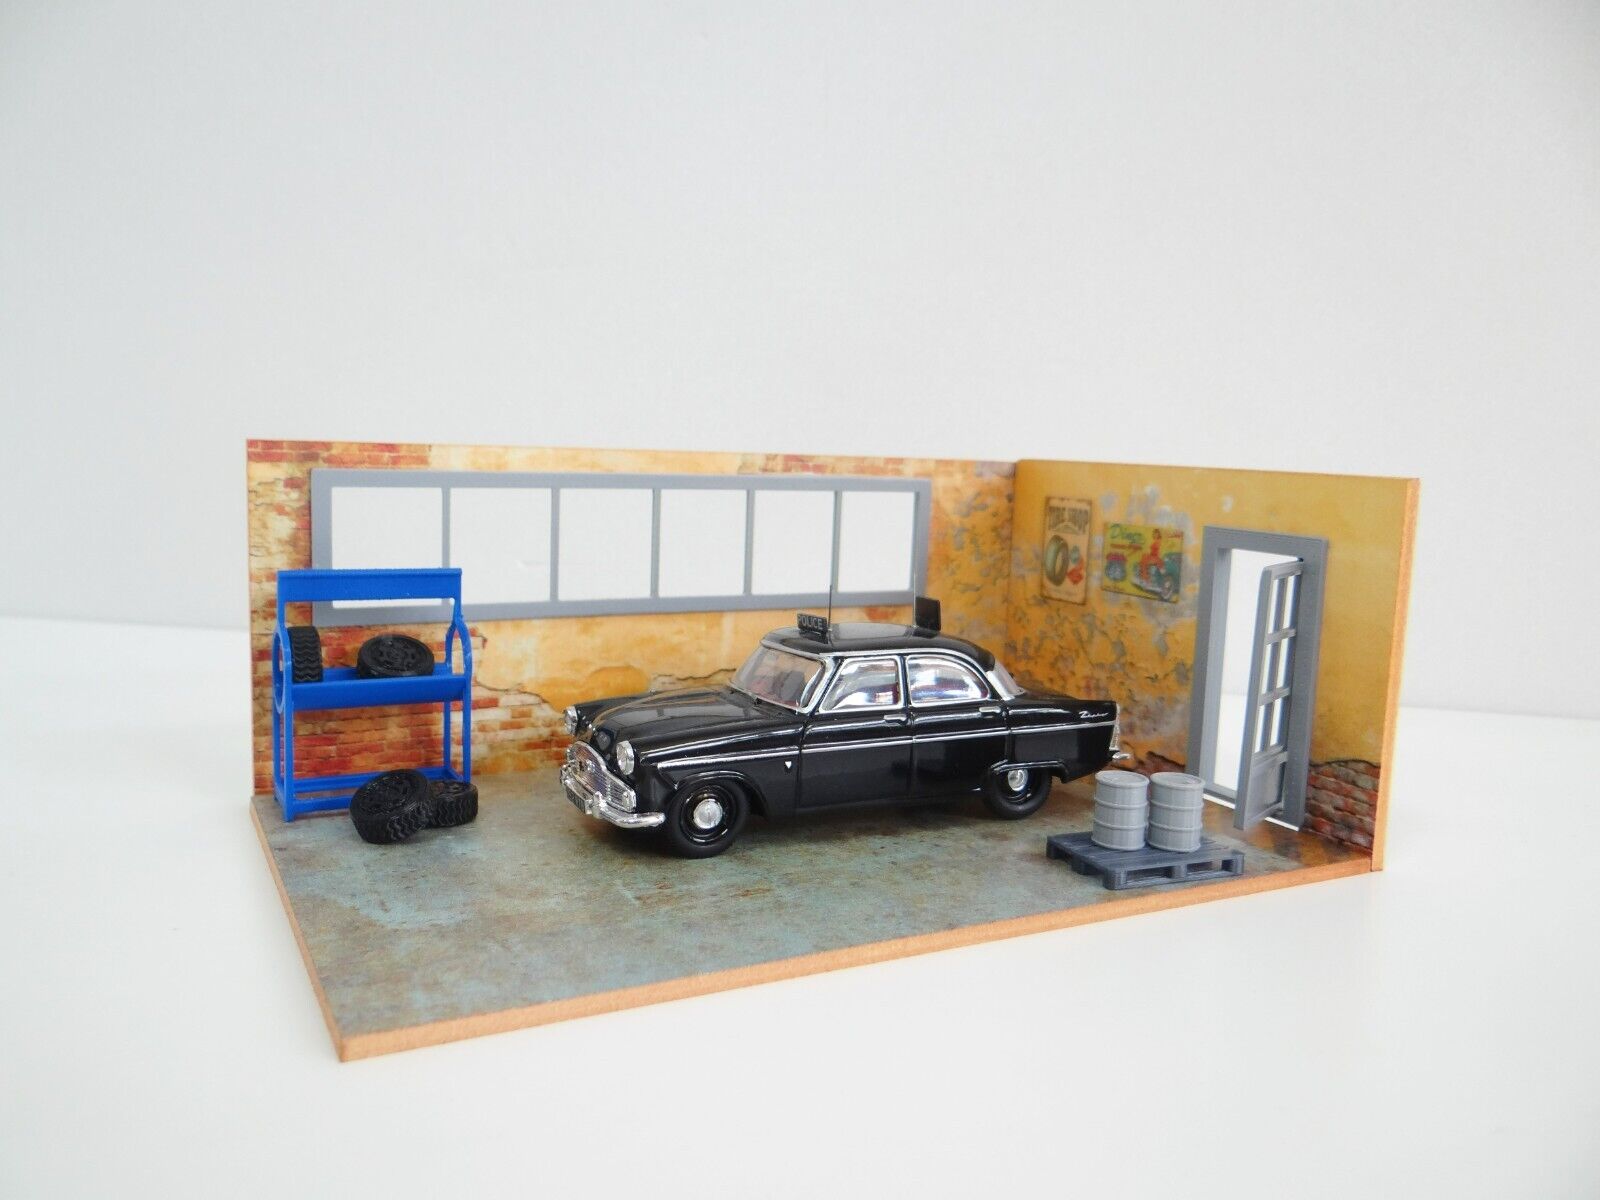 Scale 1:43 Old garage with service equipment Diorama kit Car